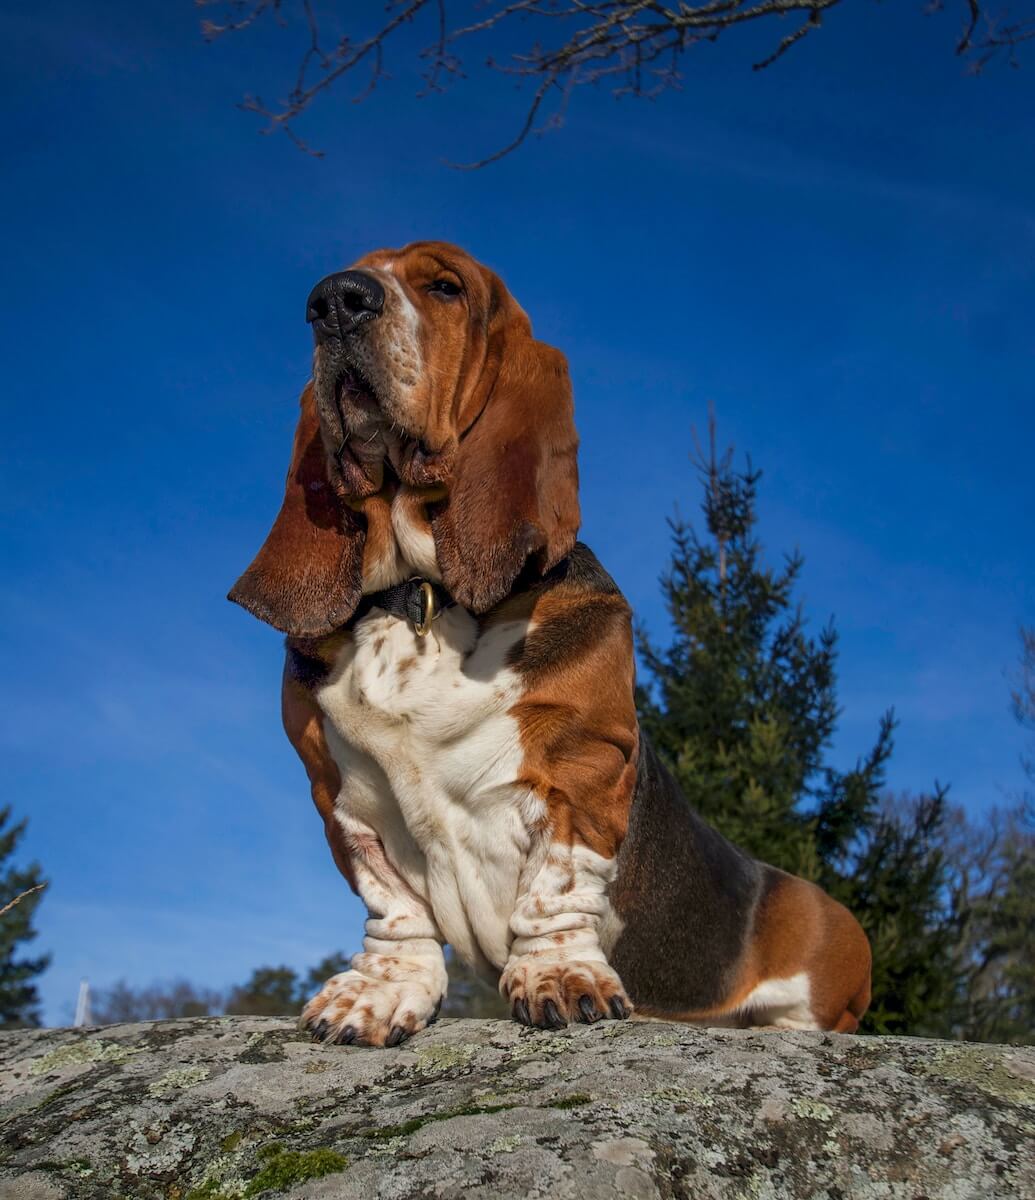 Basset Hound perched on a rock